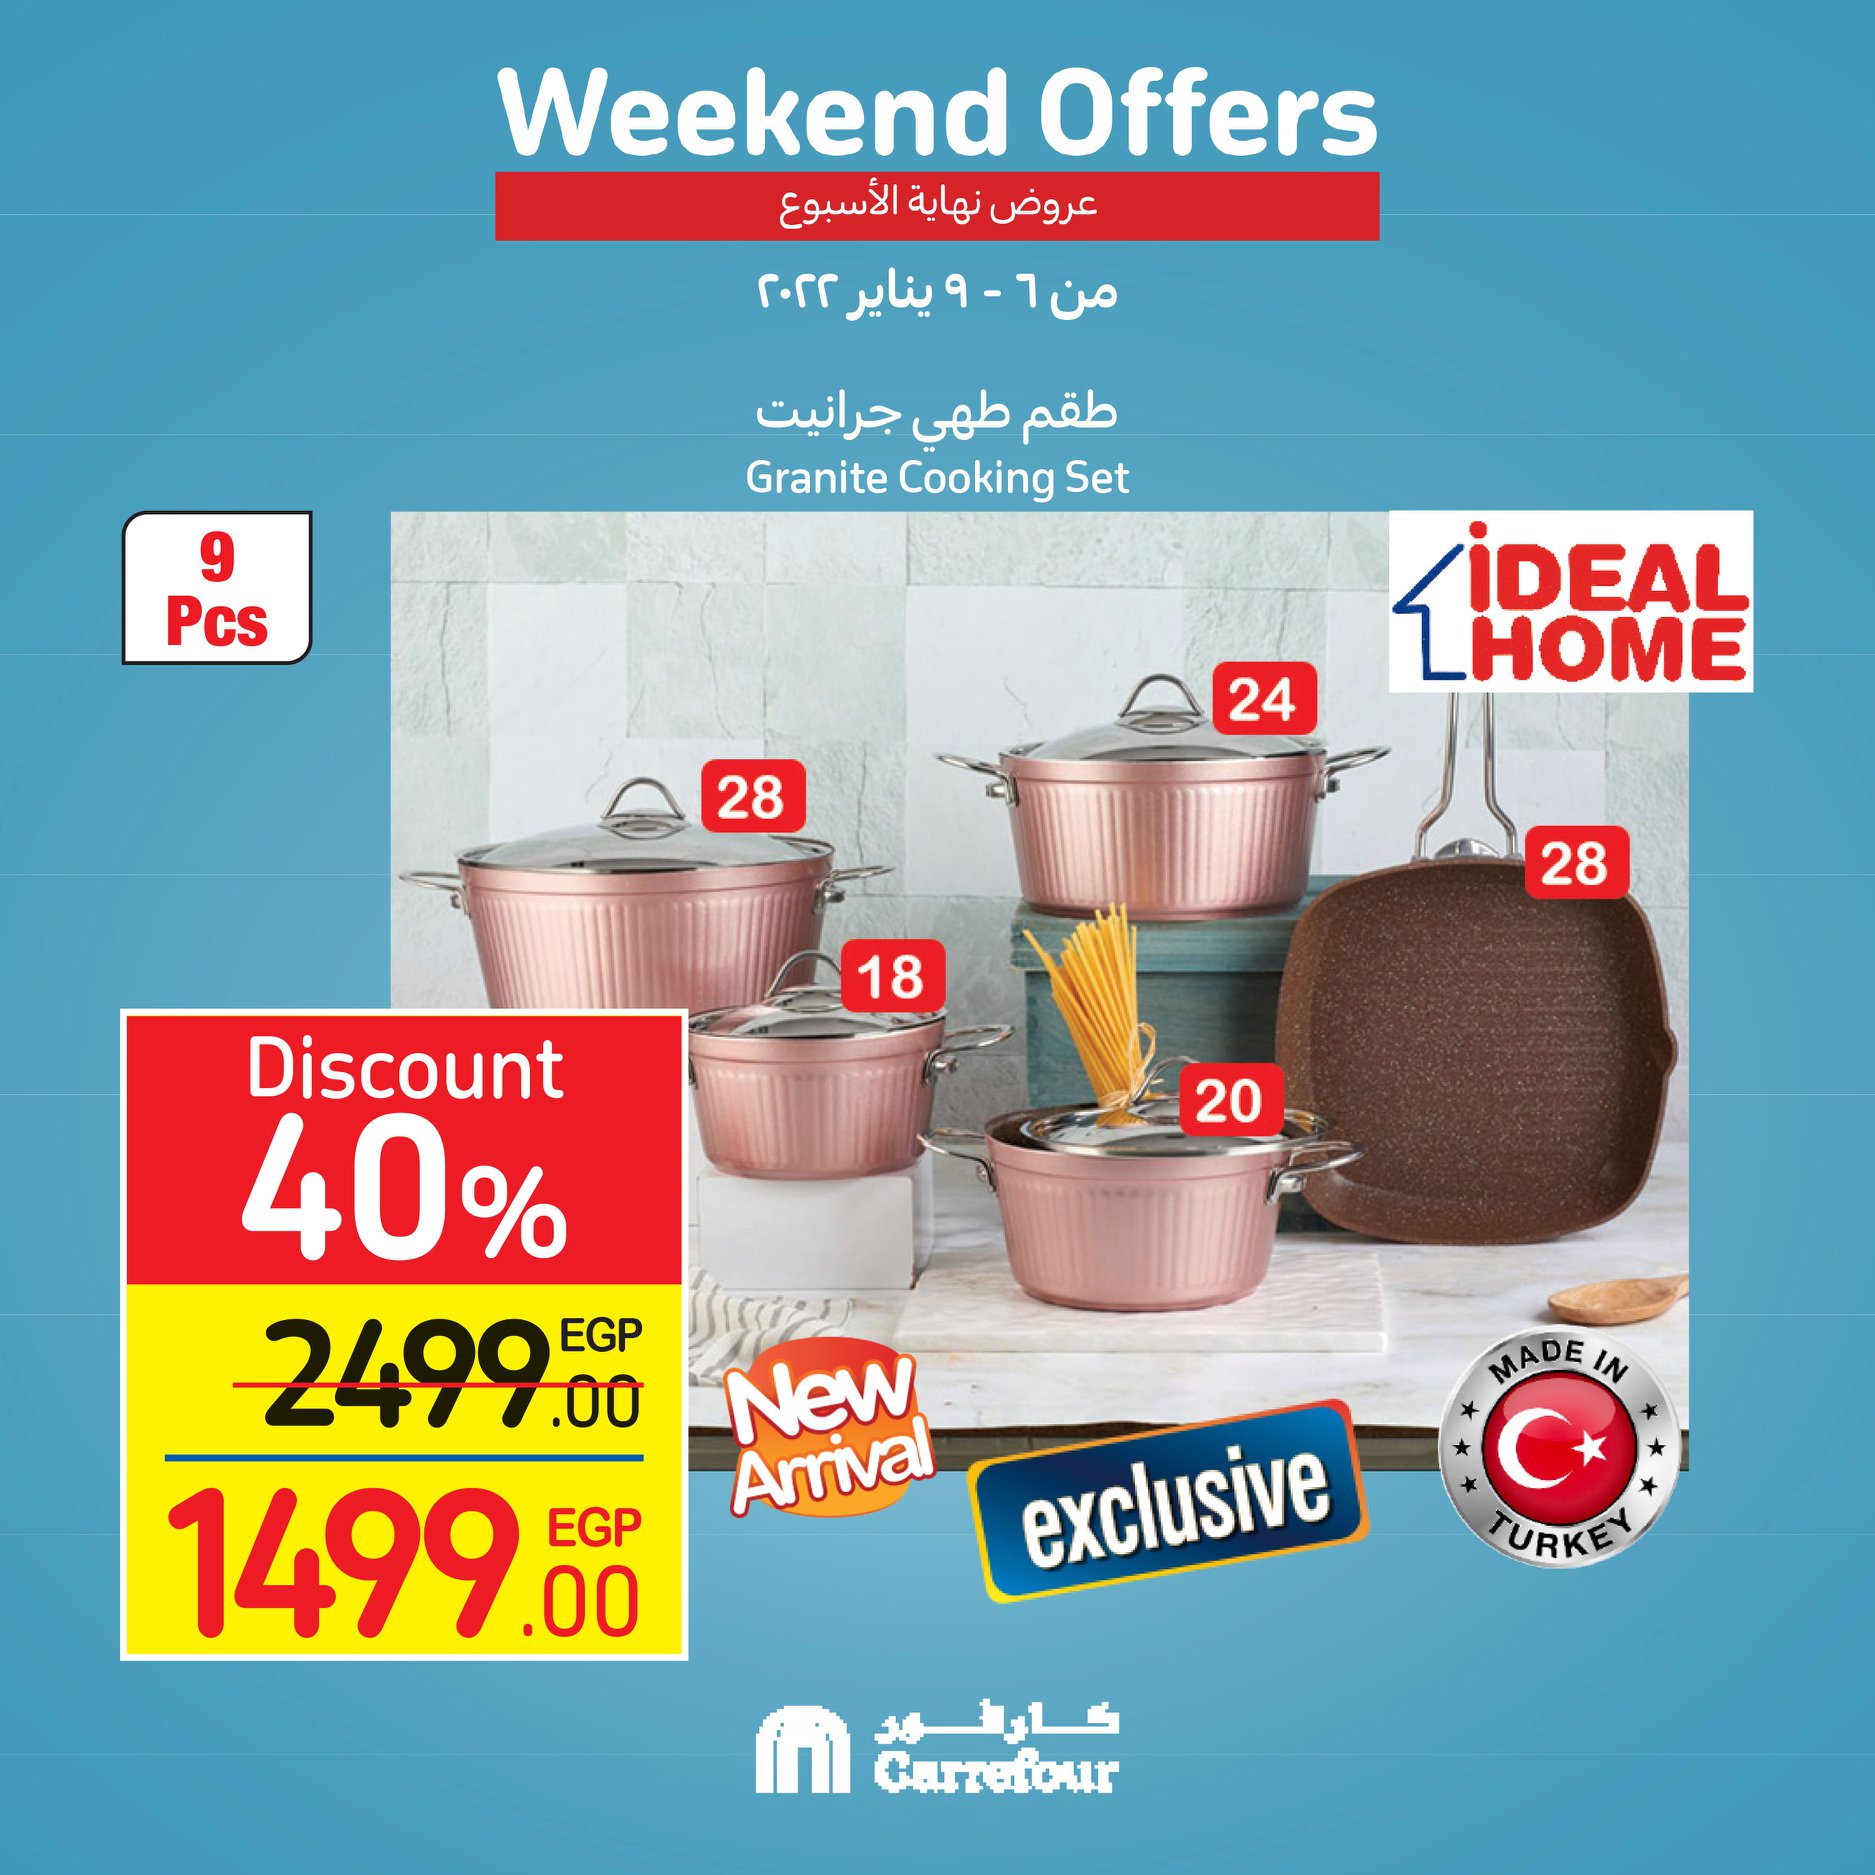 Now, the strongest offers and surprises from Carrefour, half-price discounts, at Weekend until January 16th, 26